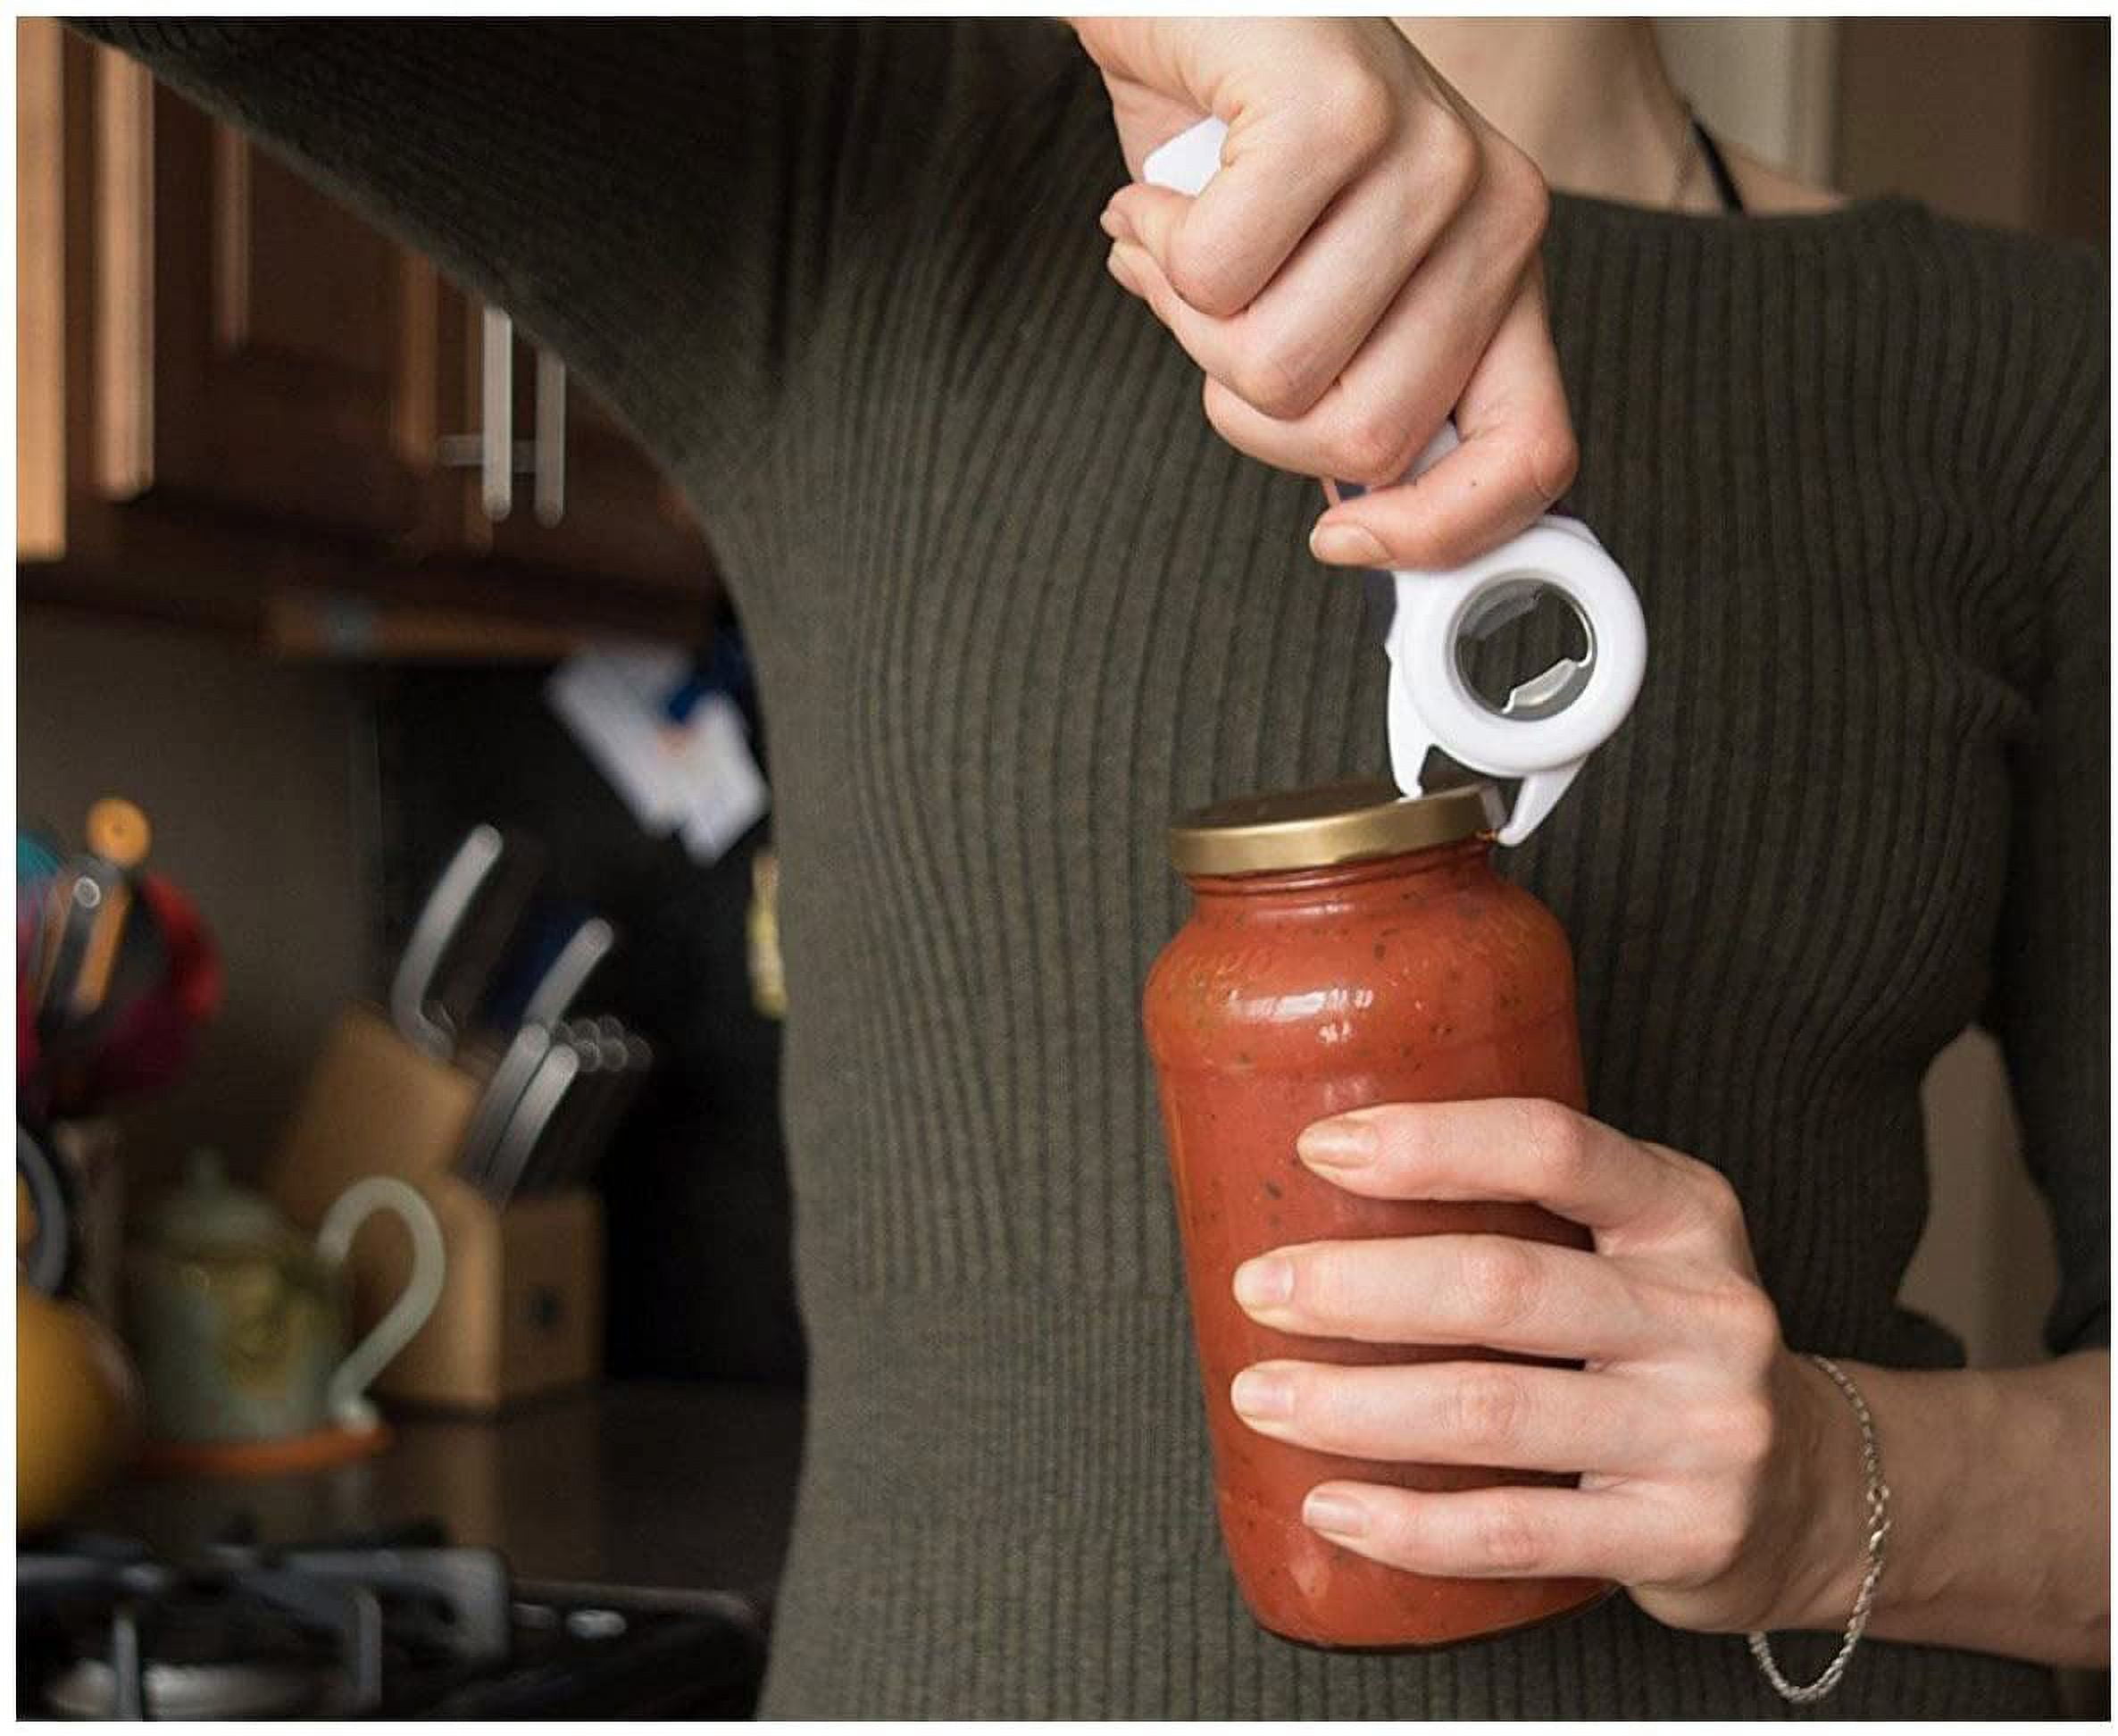 5-in-1 Opener Easily Opens Cans, Bottles, Jars and More